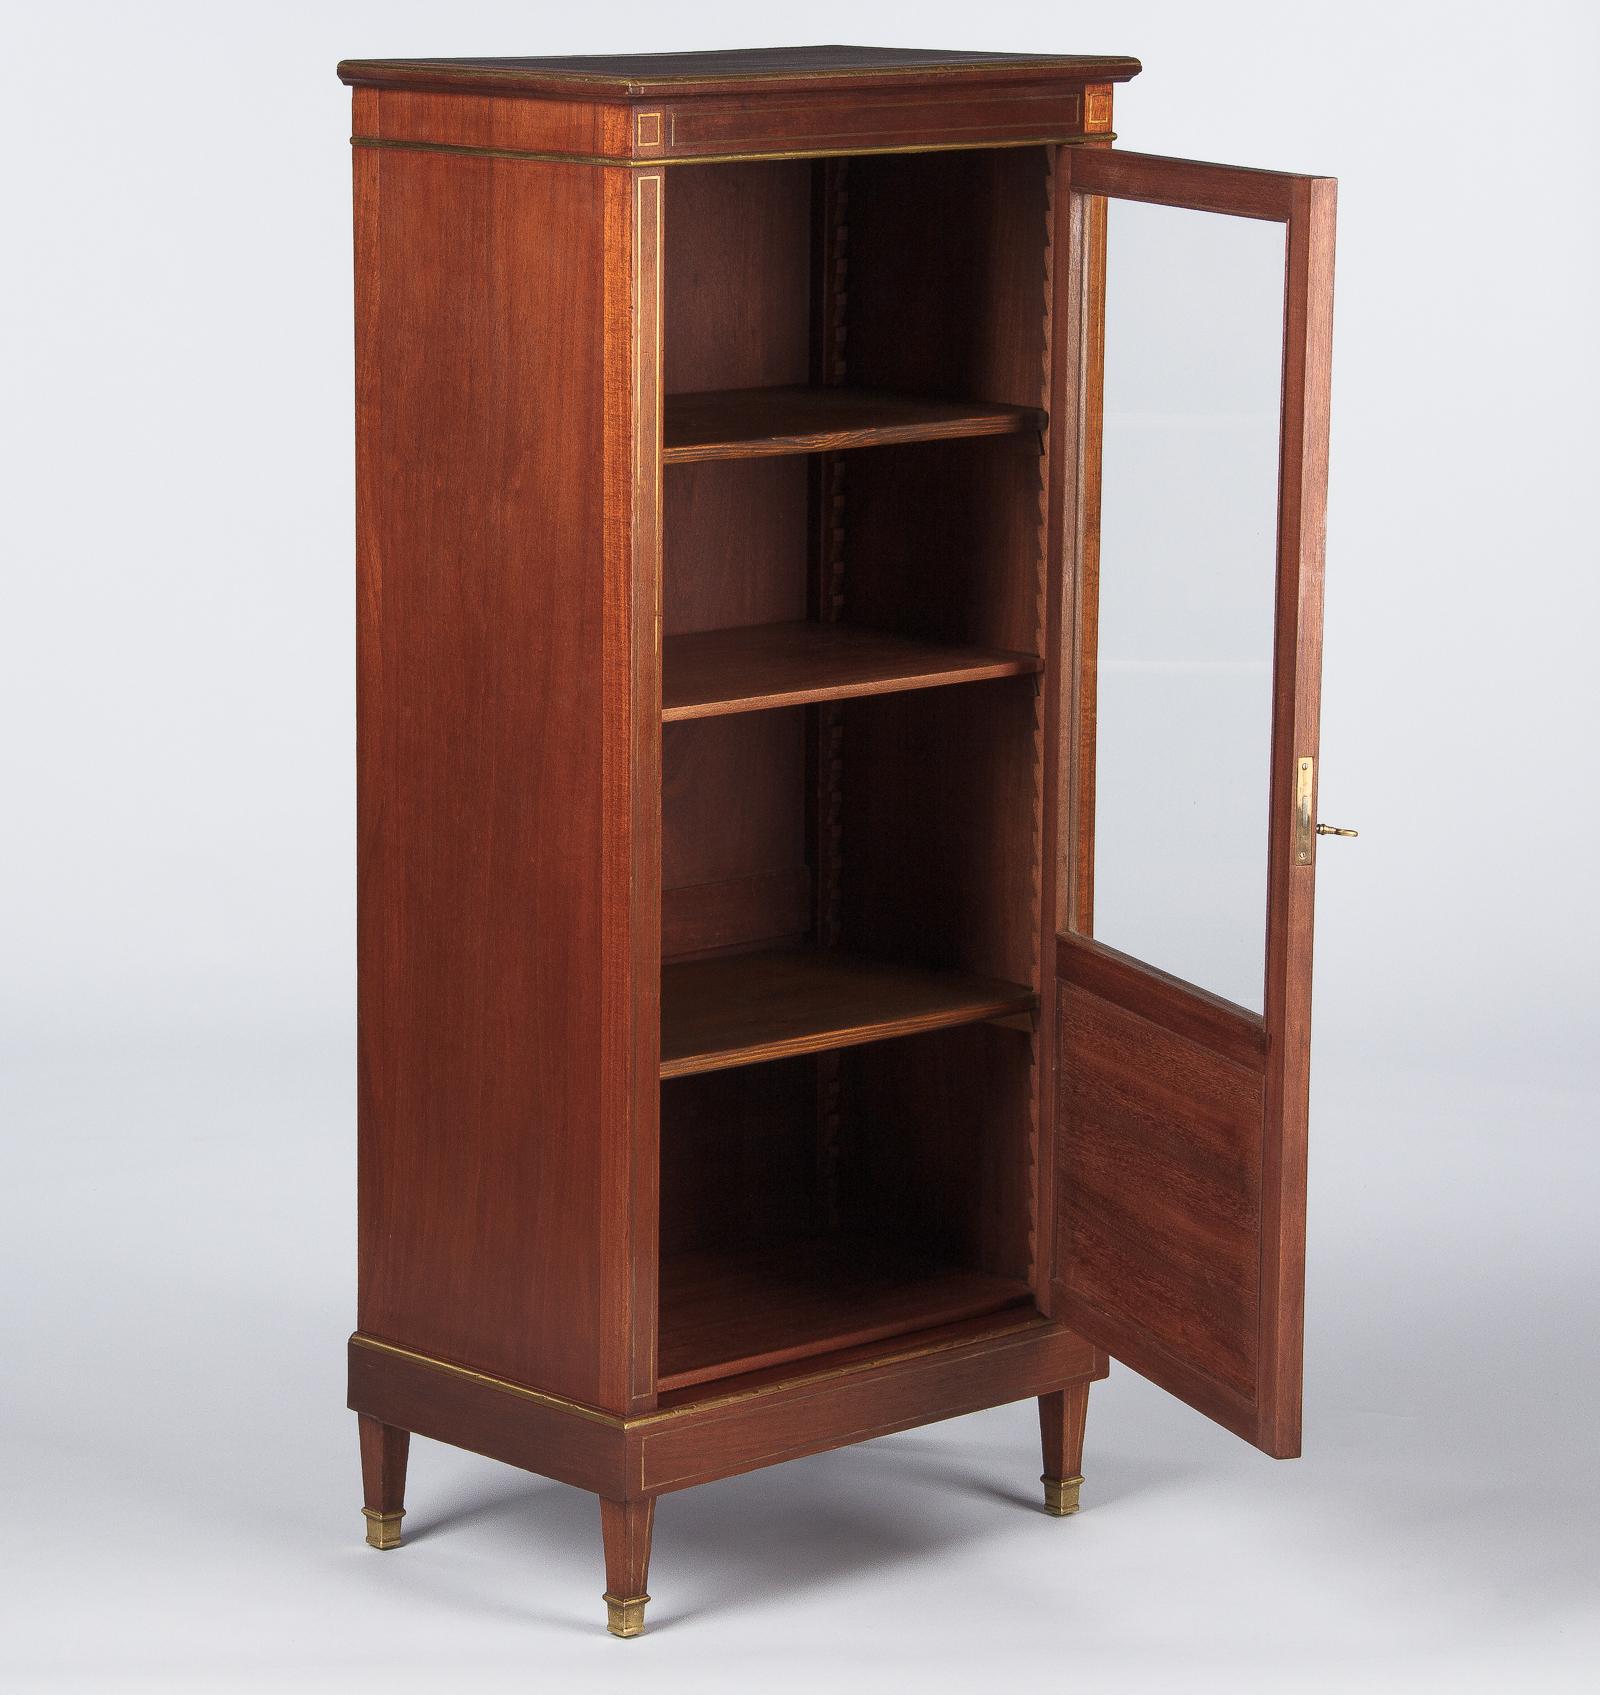 20th Century French Louis XVI Style Mahogany Display Cabinet, Early 1900s